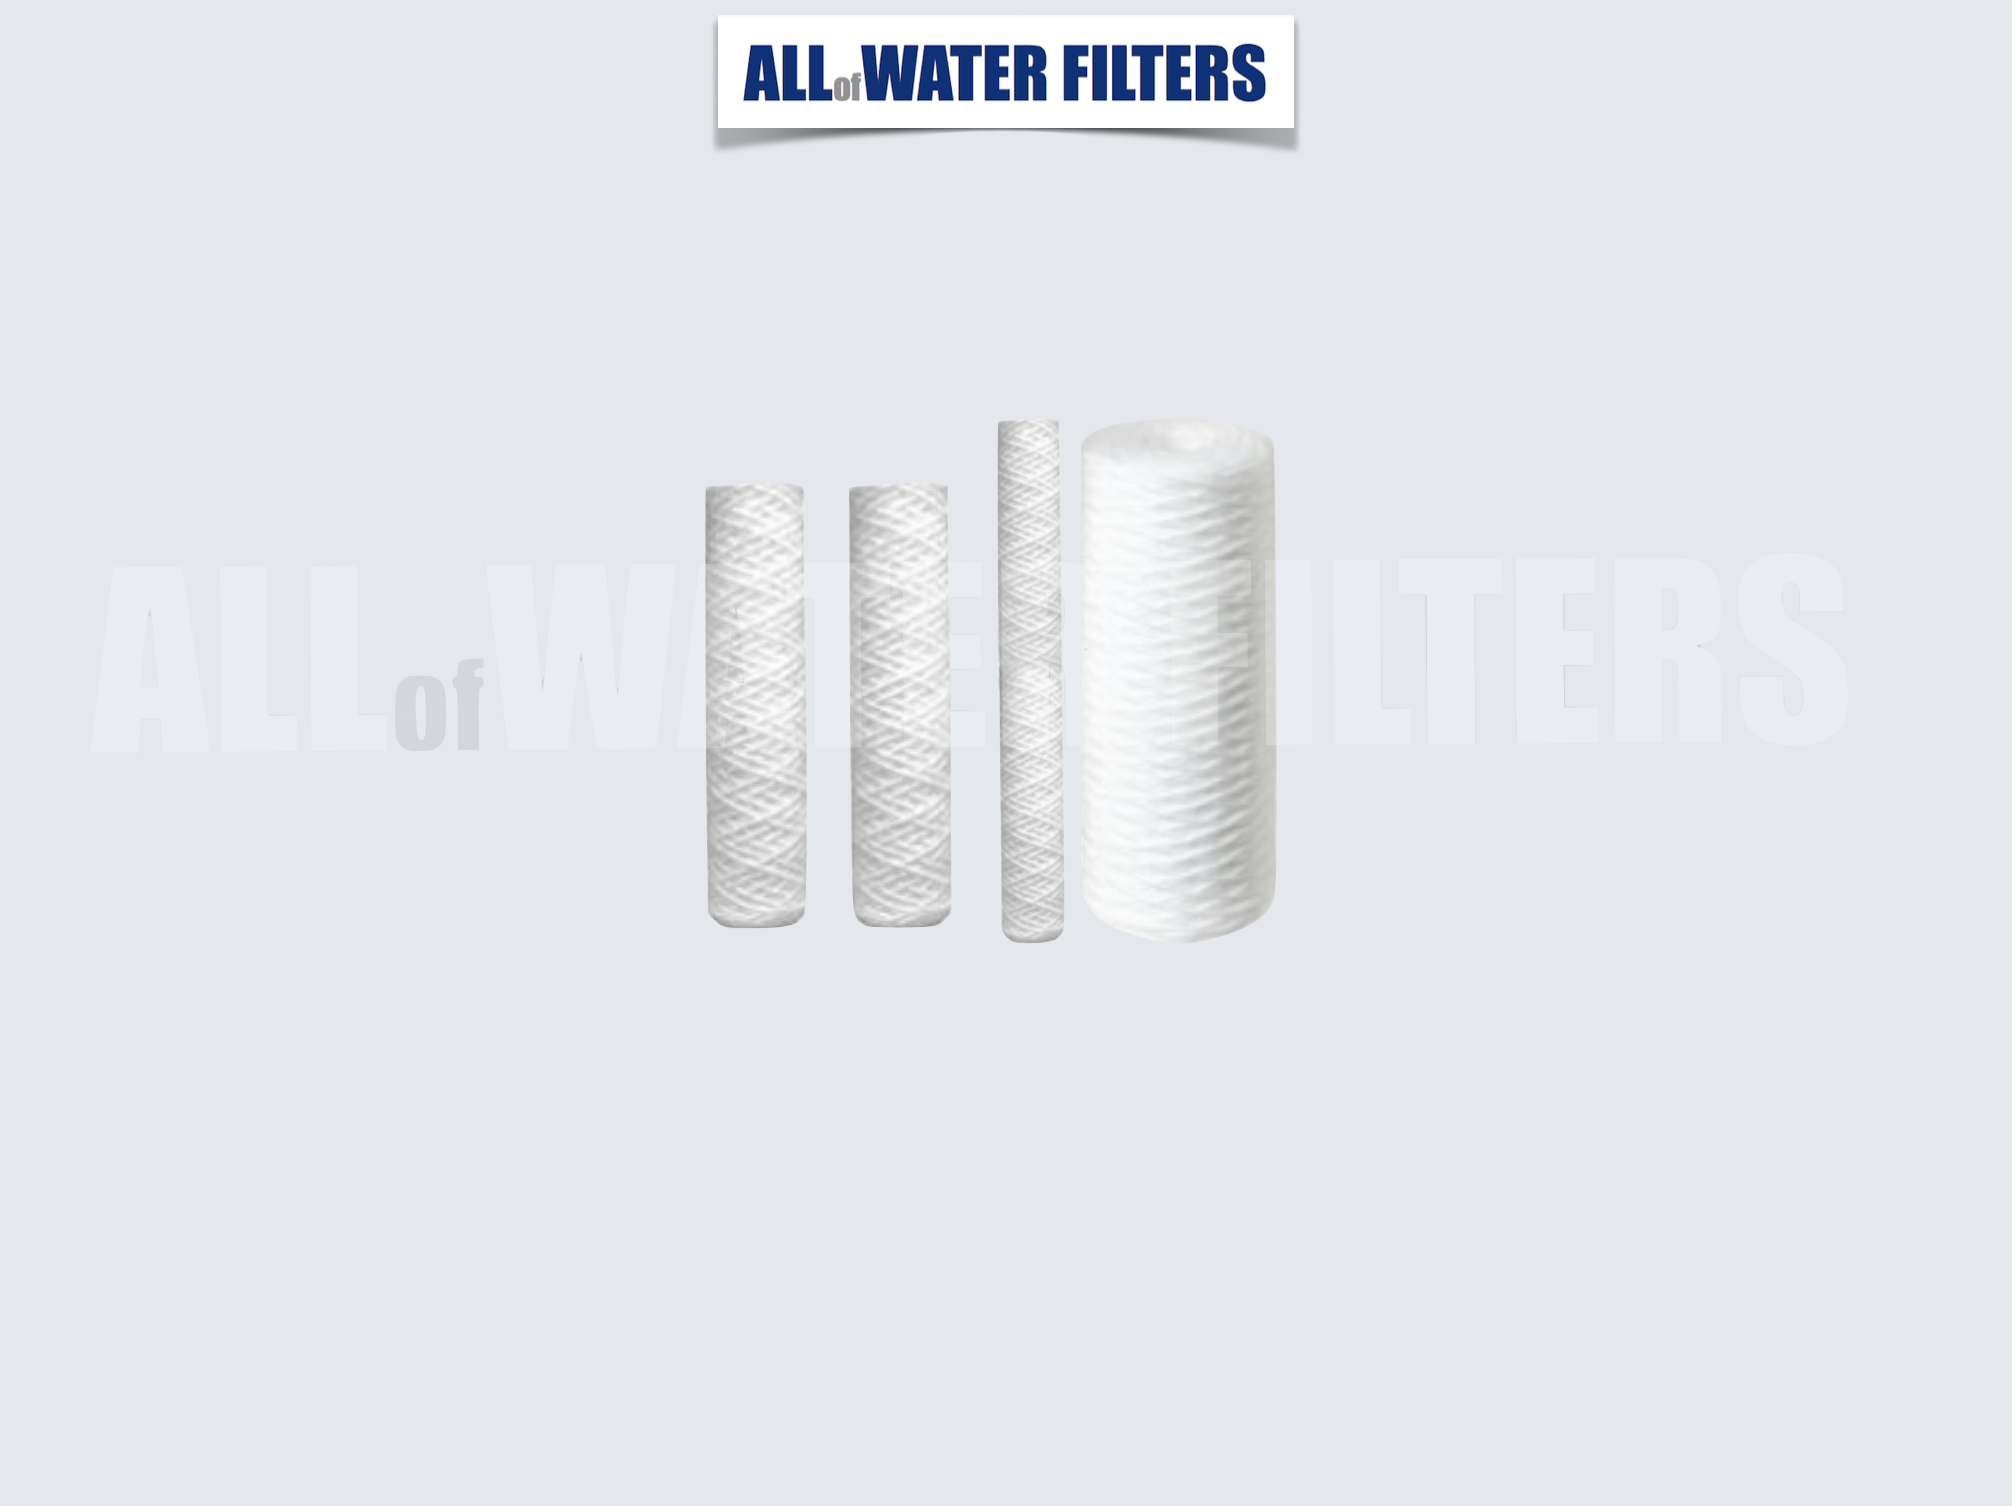 string-wound-sediment-filters